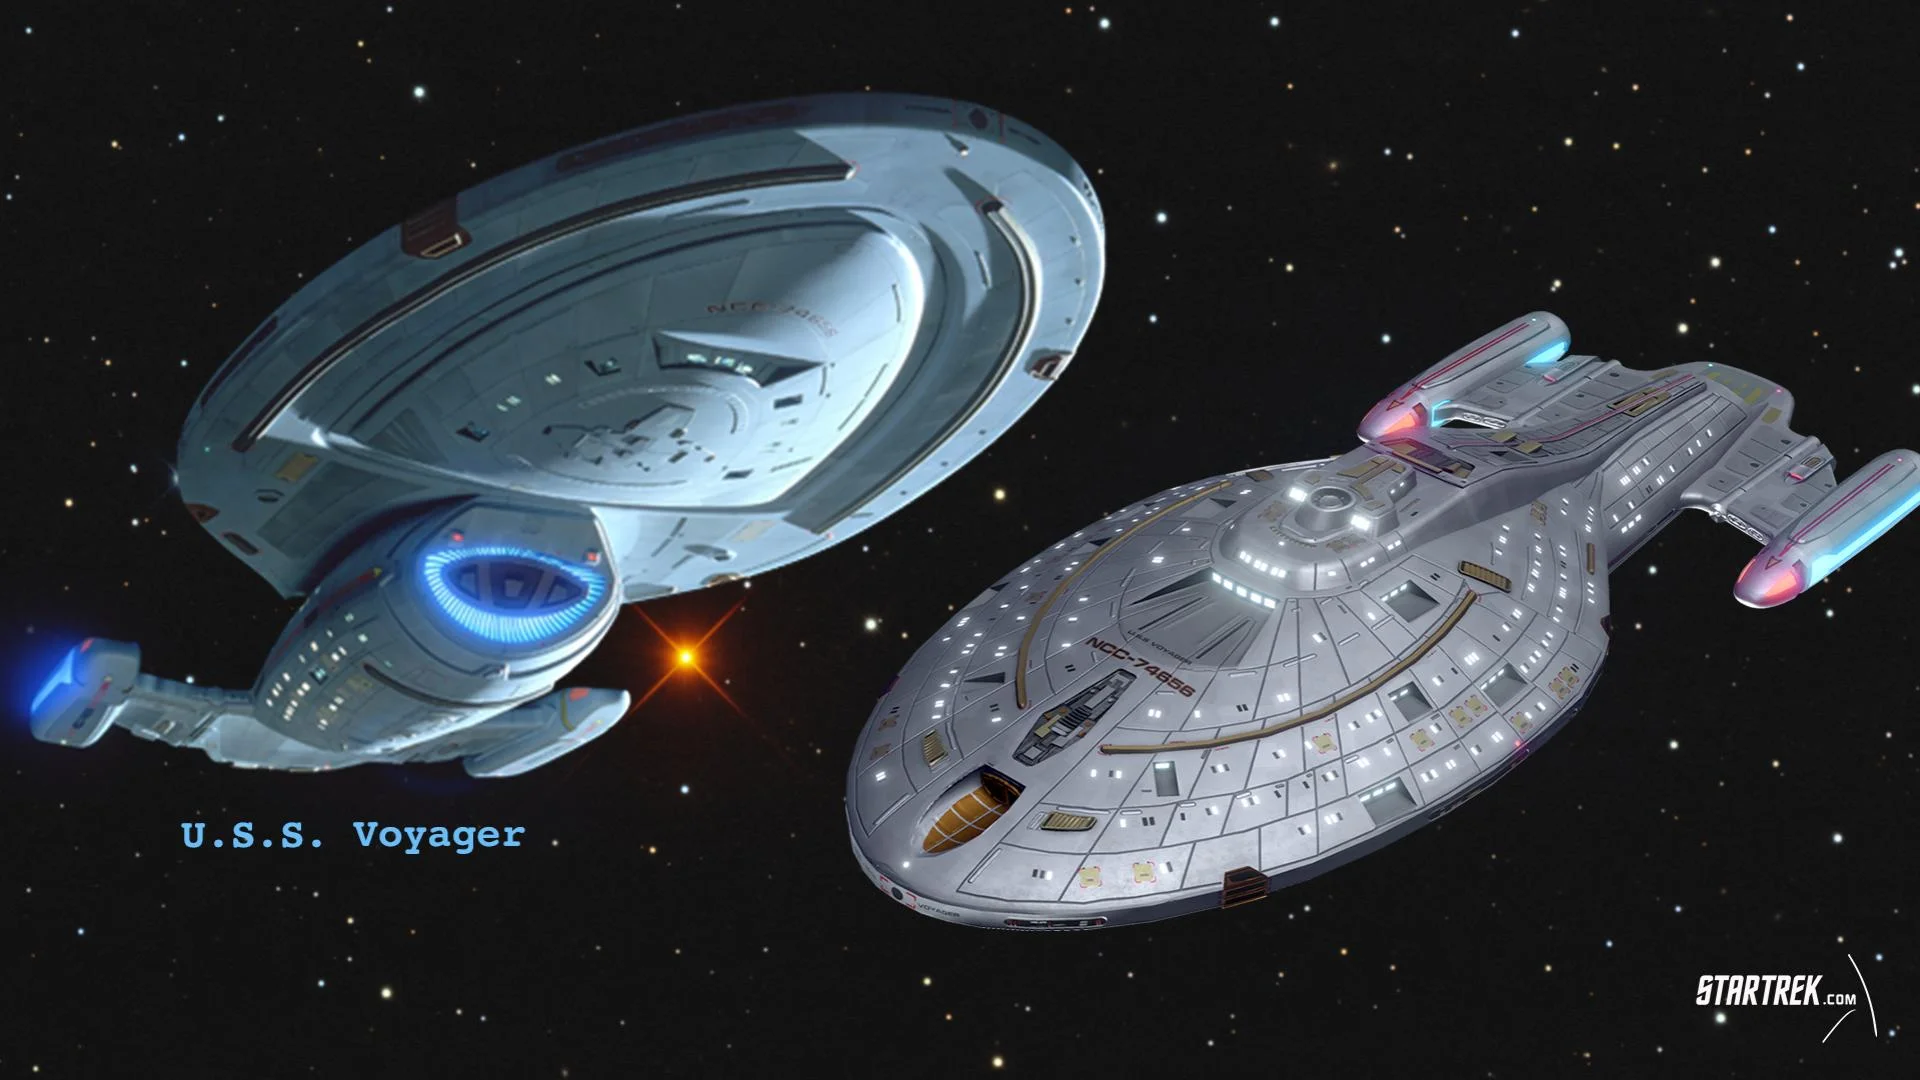 Voyager Wouldn’t Be Decommissioned As Reported